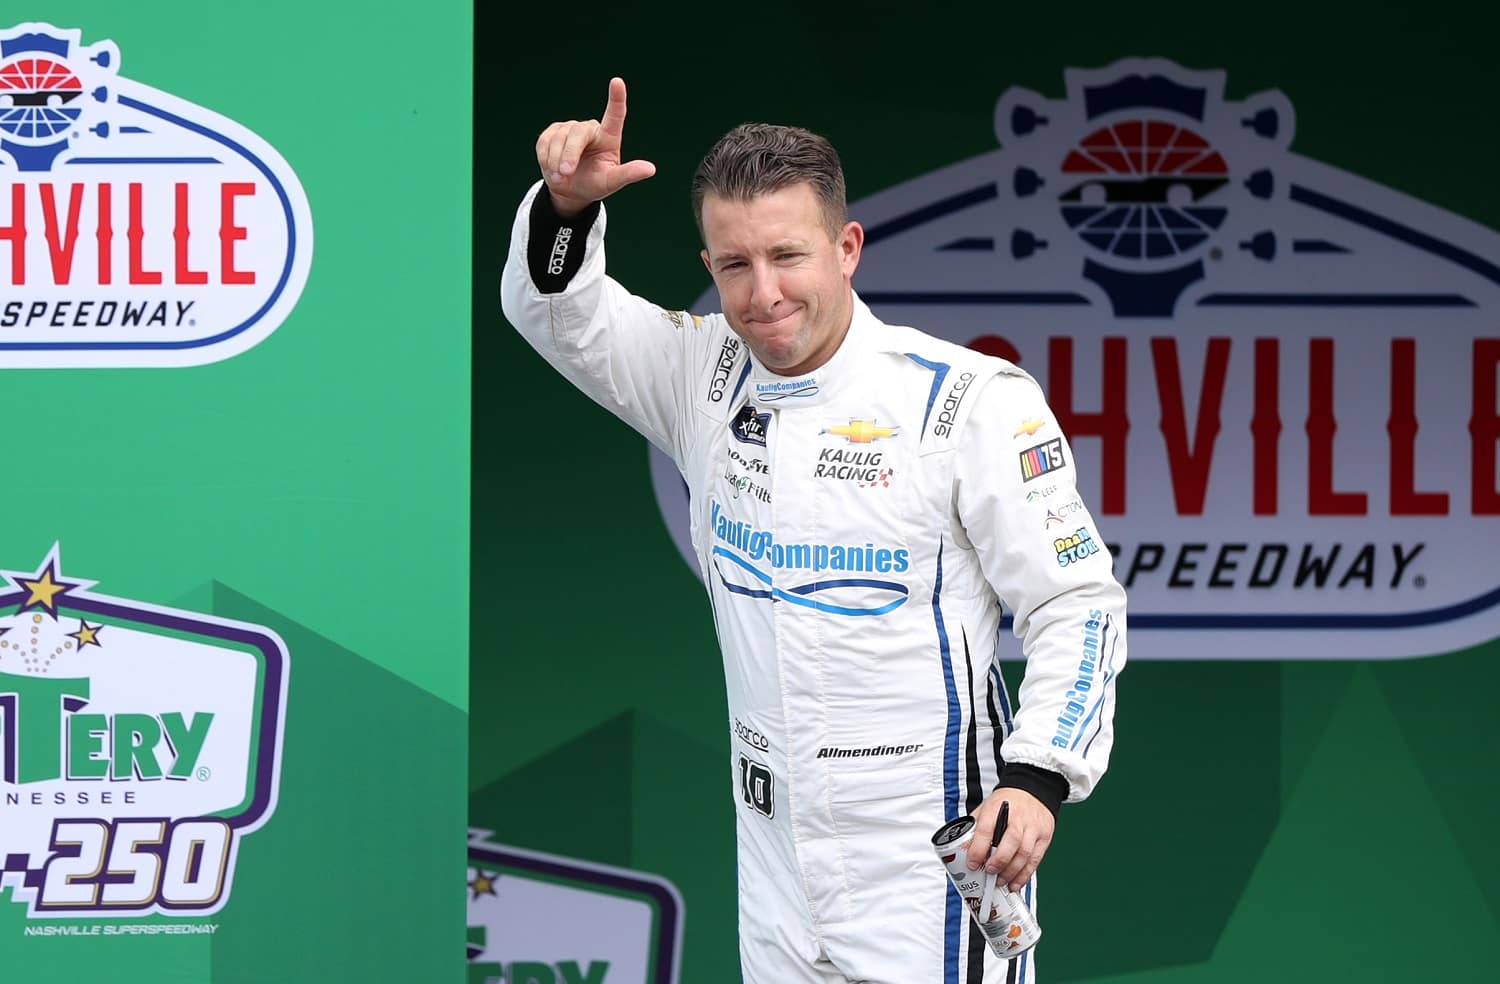 AJ Allmendinger waves to fans as he walks onstage during driver intros for the NASCAR Xfinity Series Tennessee Lottery 250 at Nashville Superspeedway on June 24, 2023.